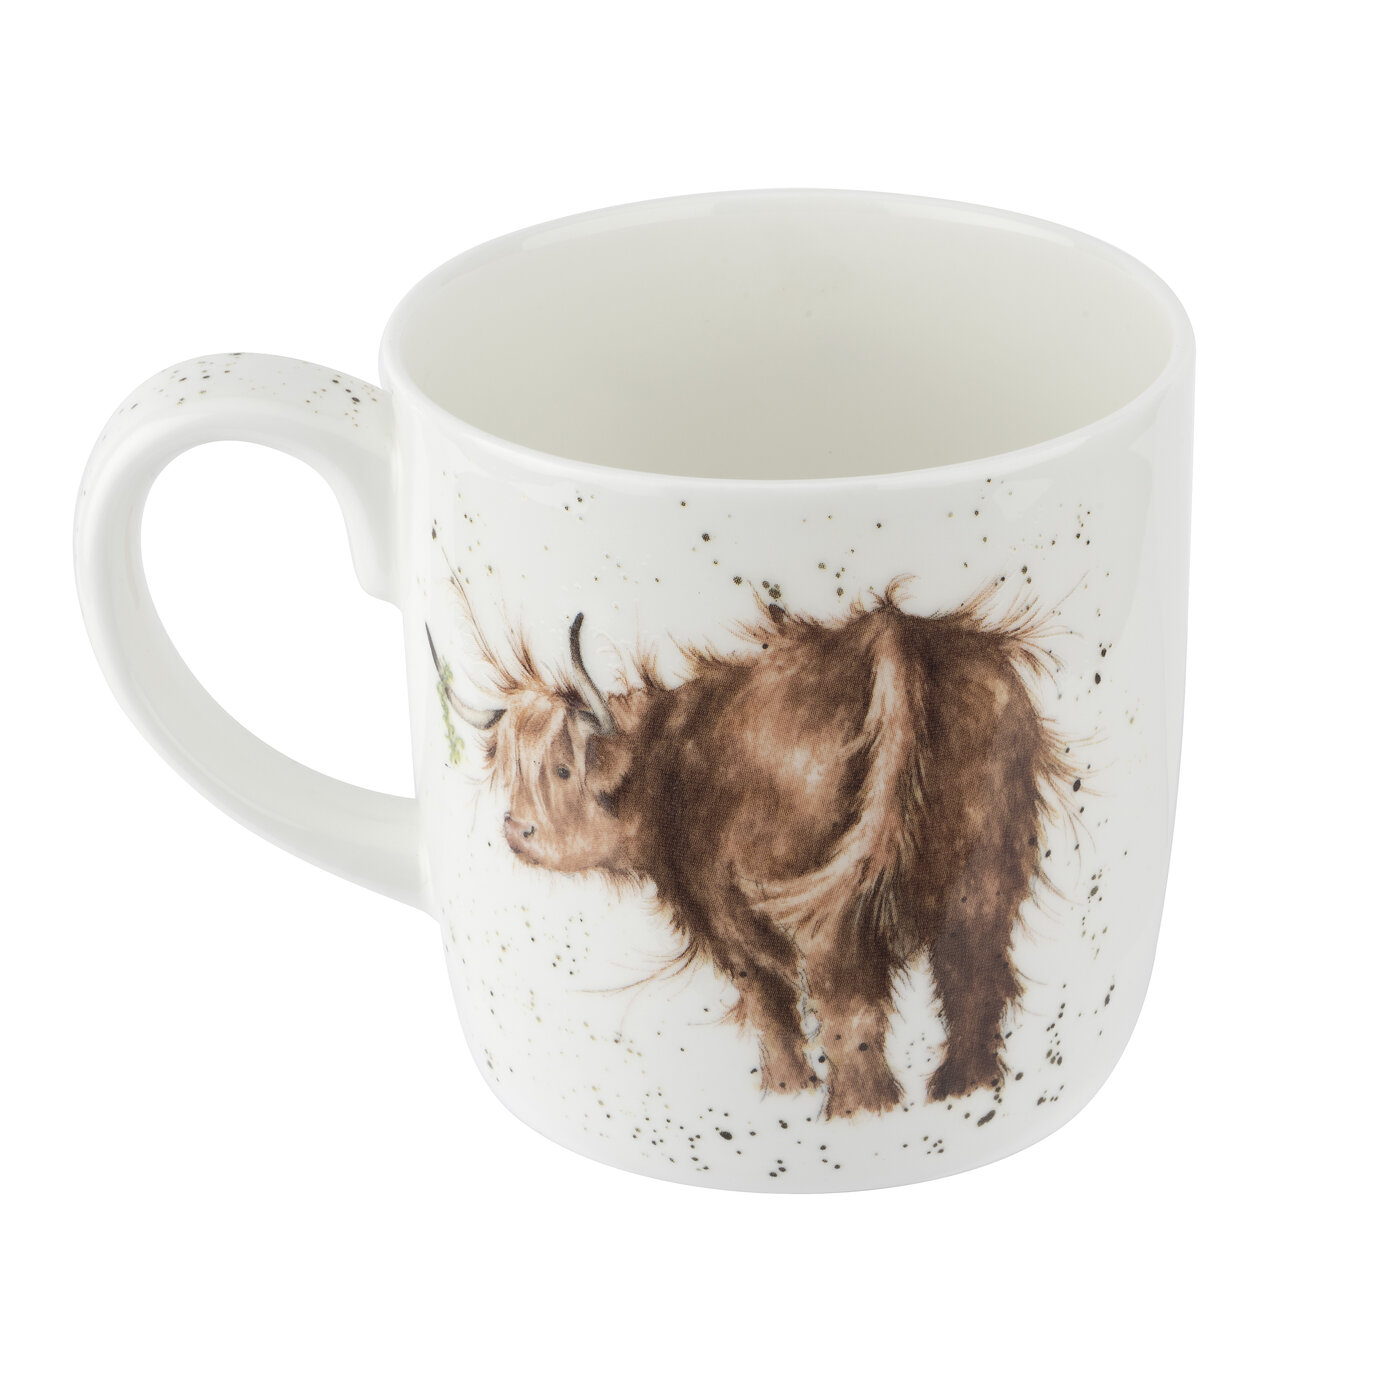 Wrendale Designs Daisy-Coo 14 fl.oz. Mug, Cow image number null